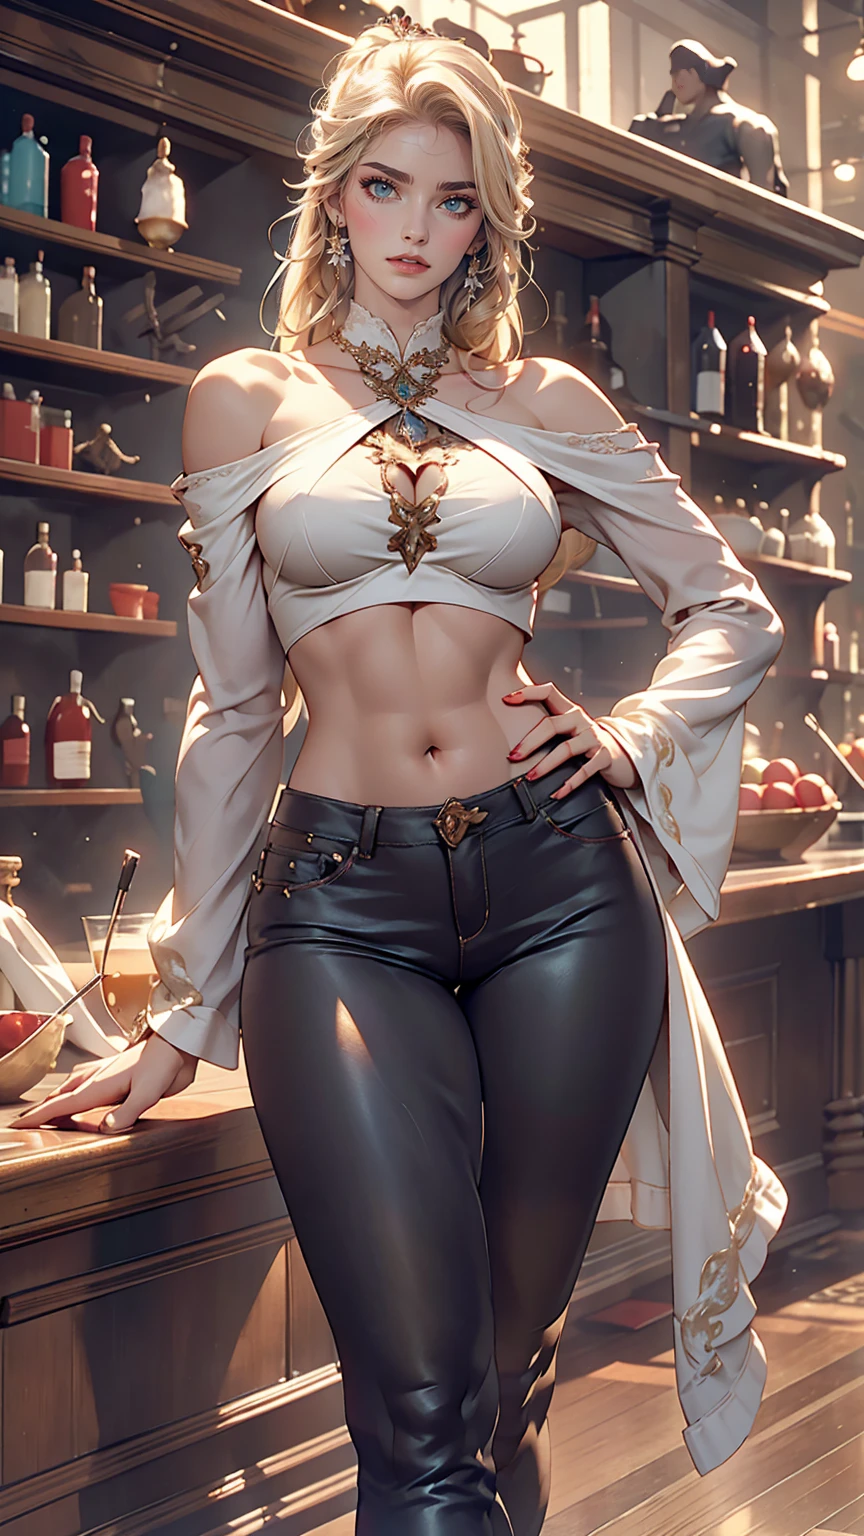 24-year-old female、White、Straight Hair、Sexy proportions、Beautiful breasts、Slender figure、Reddish、blue eyes、Wear off-the-shoulder tops、Lower milk visible、Navel visible、Wear low rise leggings、Wear stiletto heels、Place your hands on your hips、smile、Skyscraper background、Cowboy Shot